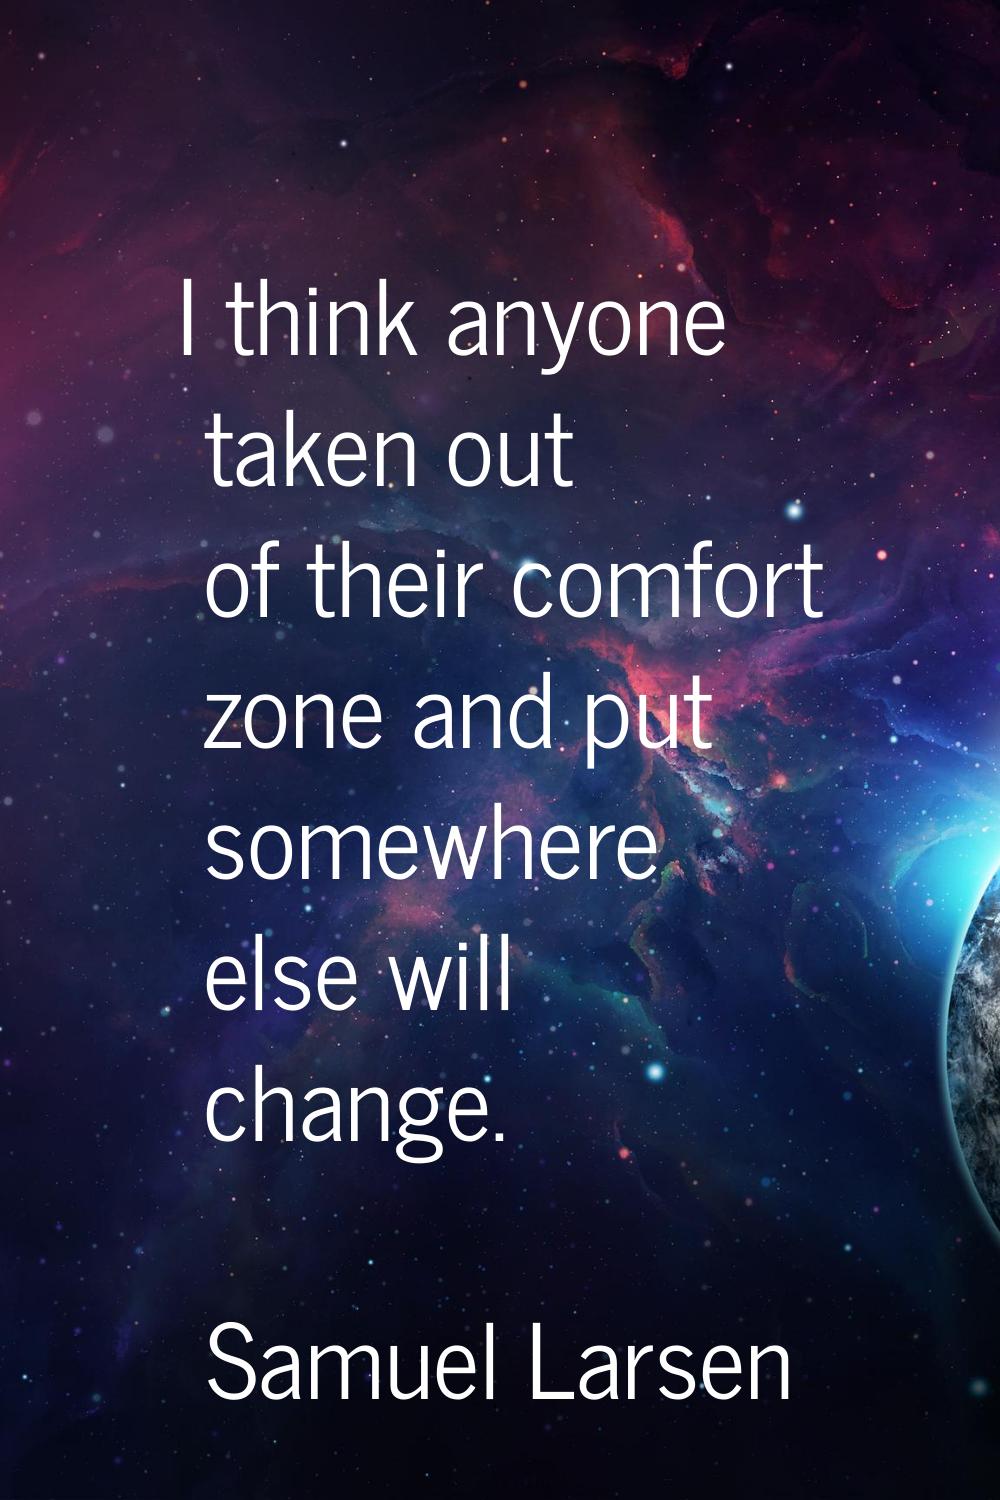 I think anyone taken out of their comfort zone and put somewhere else will change.